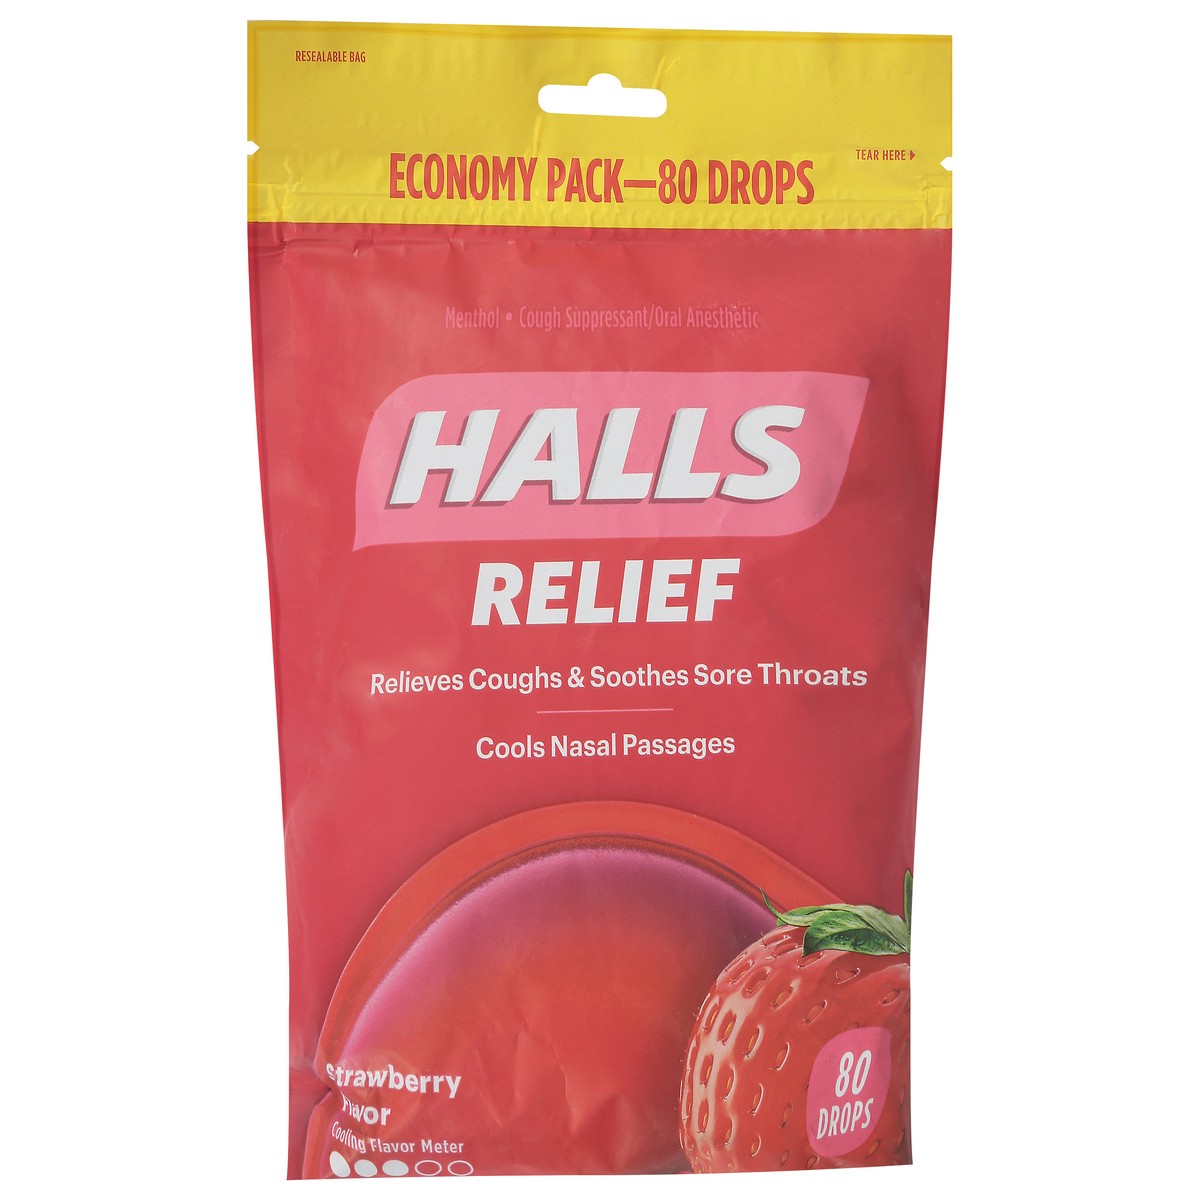 slide 3 of 9, HALLS Relief Strawberry Cough Drops, Economy Pack, 80 Drops, 8.75 oz